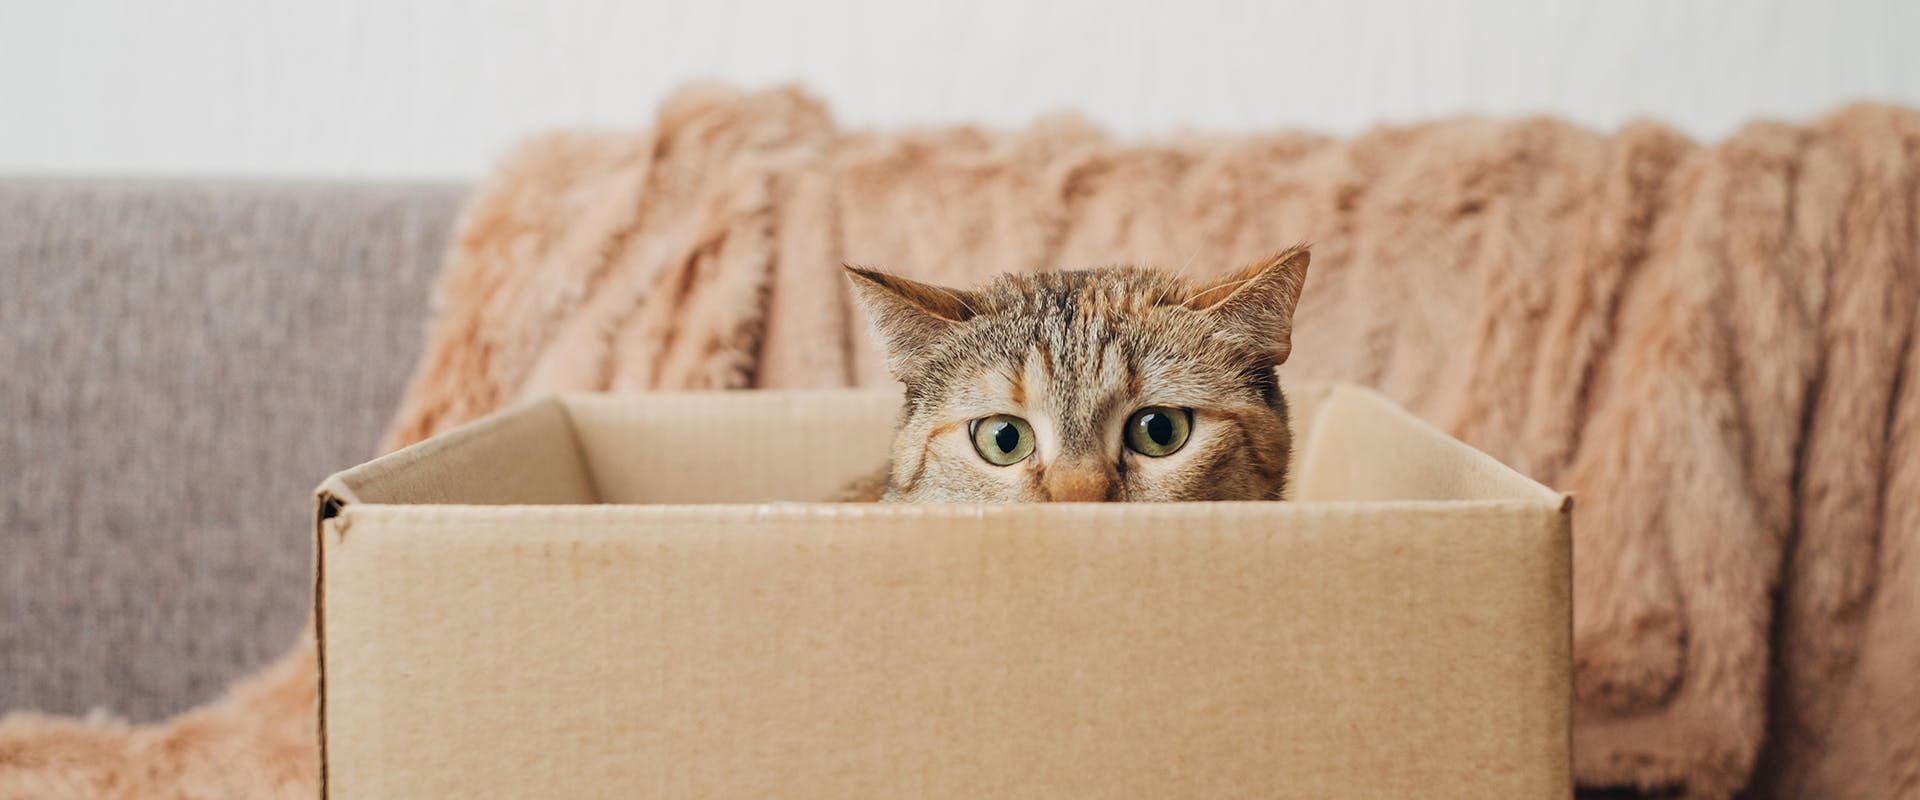 A funny cat peering out from a cardboard box